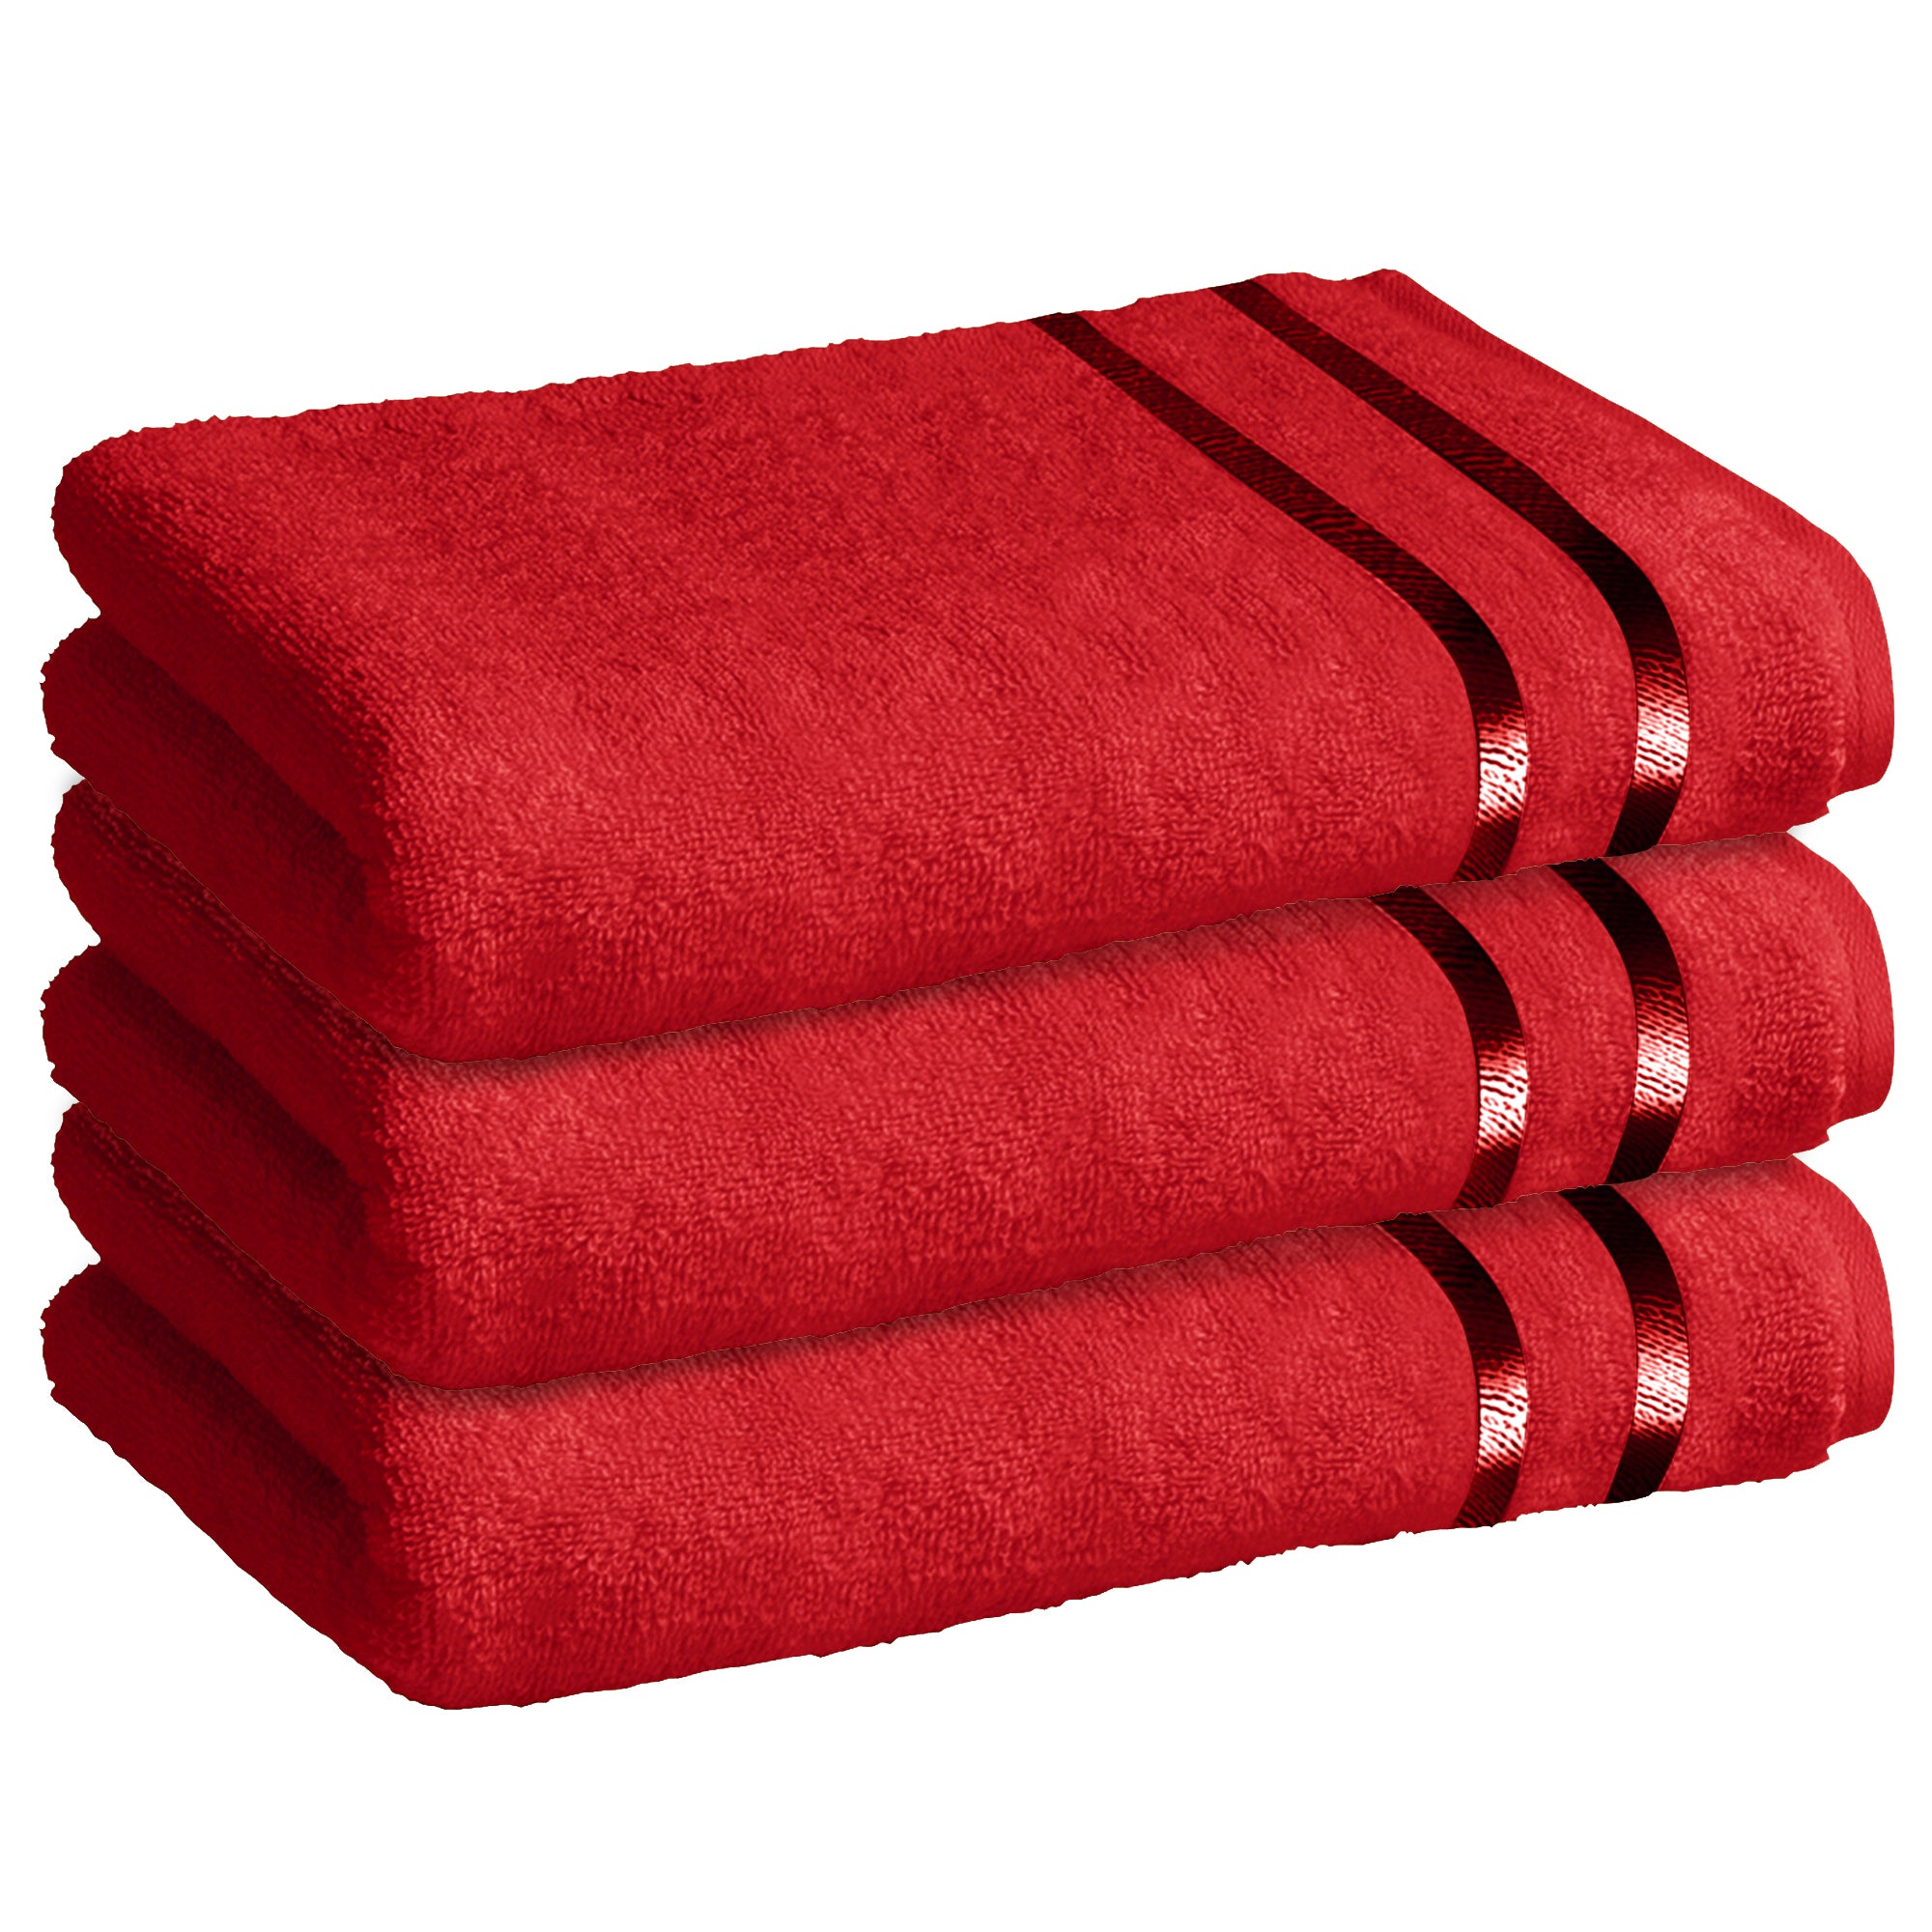 Story@Home 3 Units 100% Cotton Ladies Bath Towels - Wine Red